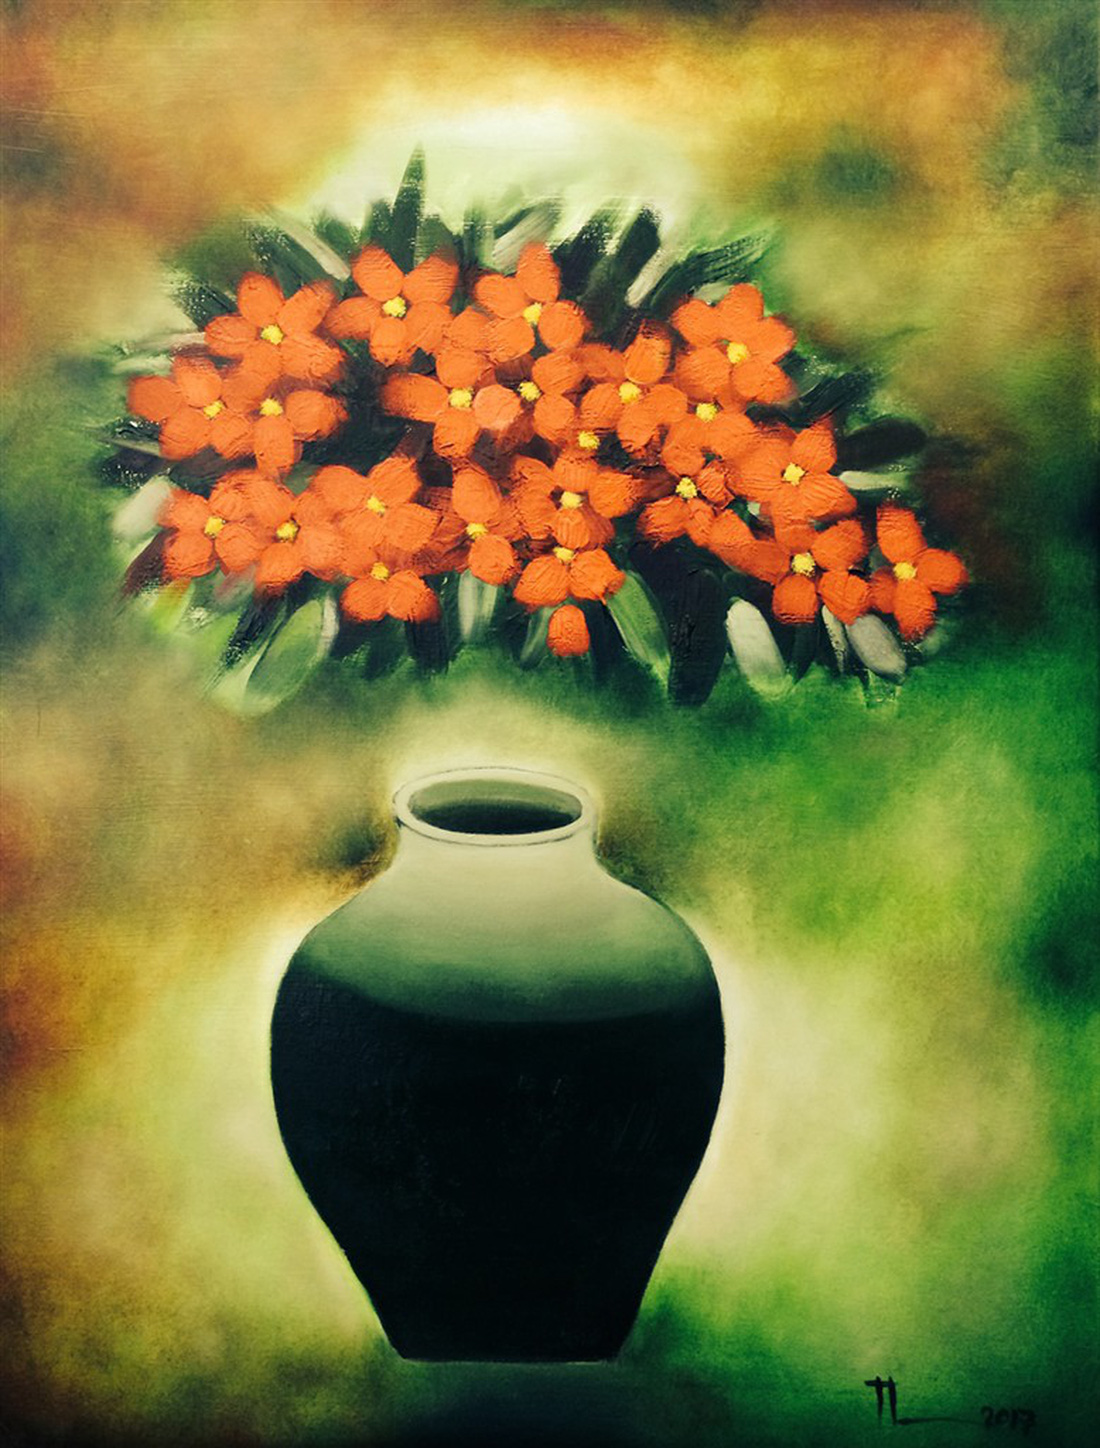 A painting by Nguyen Quang Thieu, G39. Photo: Tuoi Tre